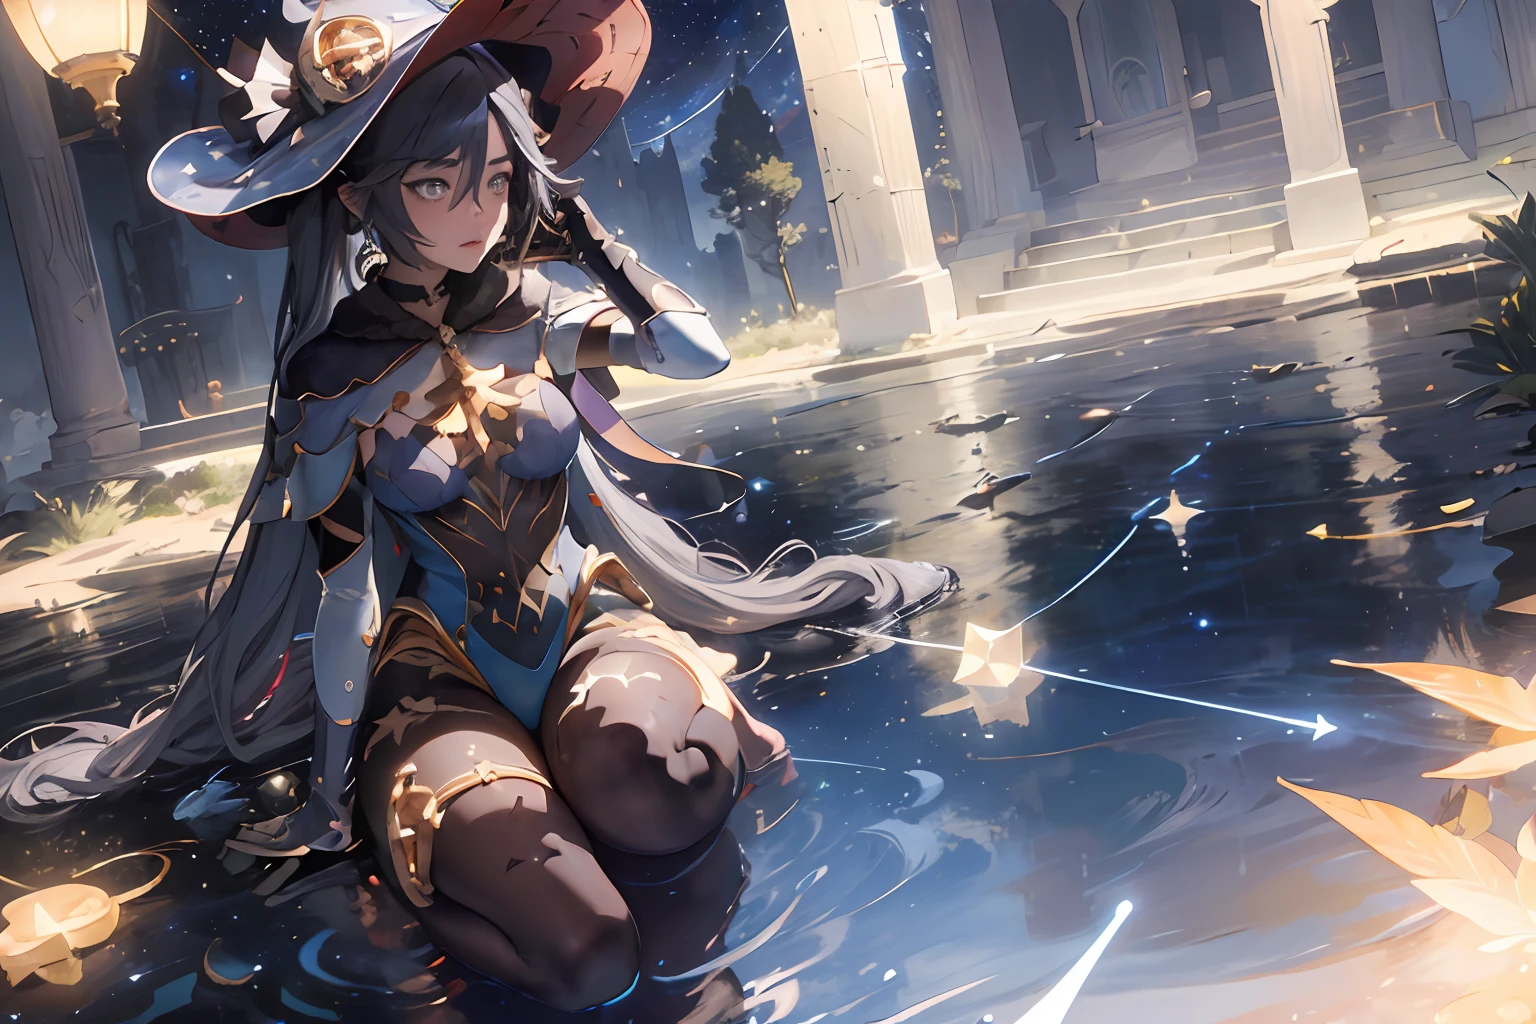 1 girl solo, long dark hair, blue bodysuit, blue witch hat, map of the sky and stars and constellations on background, hourglass, models of the planets, gold and brass details, dark room with light garlands, cinematic light, cinematic shot, glowing details, (Masterpiece:1.2), best quality, (night sky, short grey hair:1.2),(illustration:1.2), beautiful scenery, scared,(Masterfully crafted Glow, lens flare), (ultra-detailed), hyper details, (delicate detailed), (intricate details), (cinematic light, best quality Backlights), clear line, new world, viewer, solo female, perfect body, (1female), (Bright bioluminescent hair hair, bright glowing eyes), (Dynamic:1.3), ((makeup)), high contrast, (best illumination, an extremely delicate and beautiful), ((cinematic moonlight)), colourful, ((Photoshop Pastel Painting:1.1)), ethereal, (Cinematic masterpiece),suspense, splashes of colour, absolutely eye-catching, ((caustic)), dynamic angle ,beautiful (detailed glow), (eerie),(Intricate Detailed Cinematic Scenery Behind:1.2),ambient occlusion, (ambient moonlight), ray-traced reflections, intricately detailed visible background